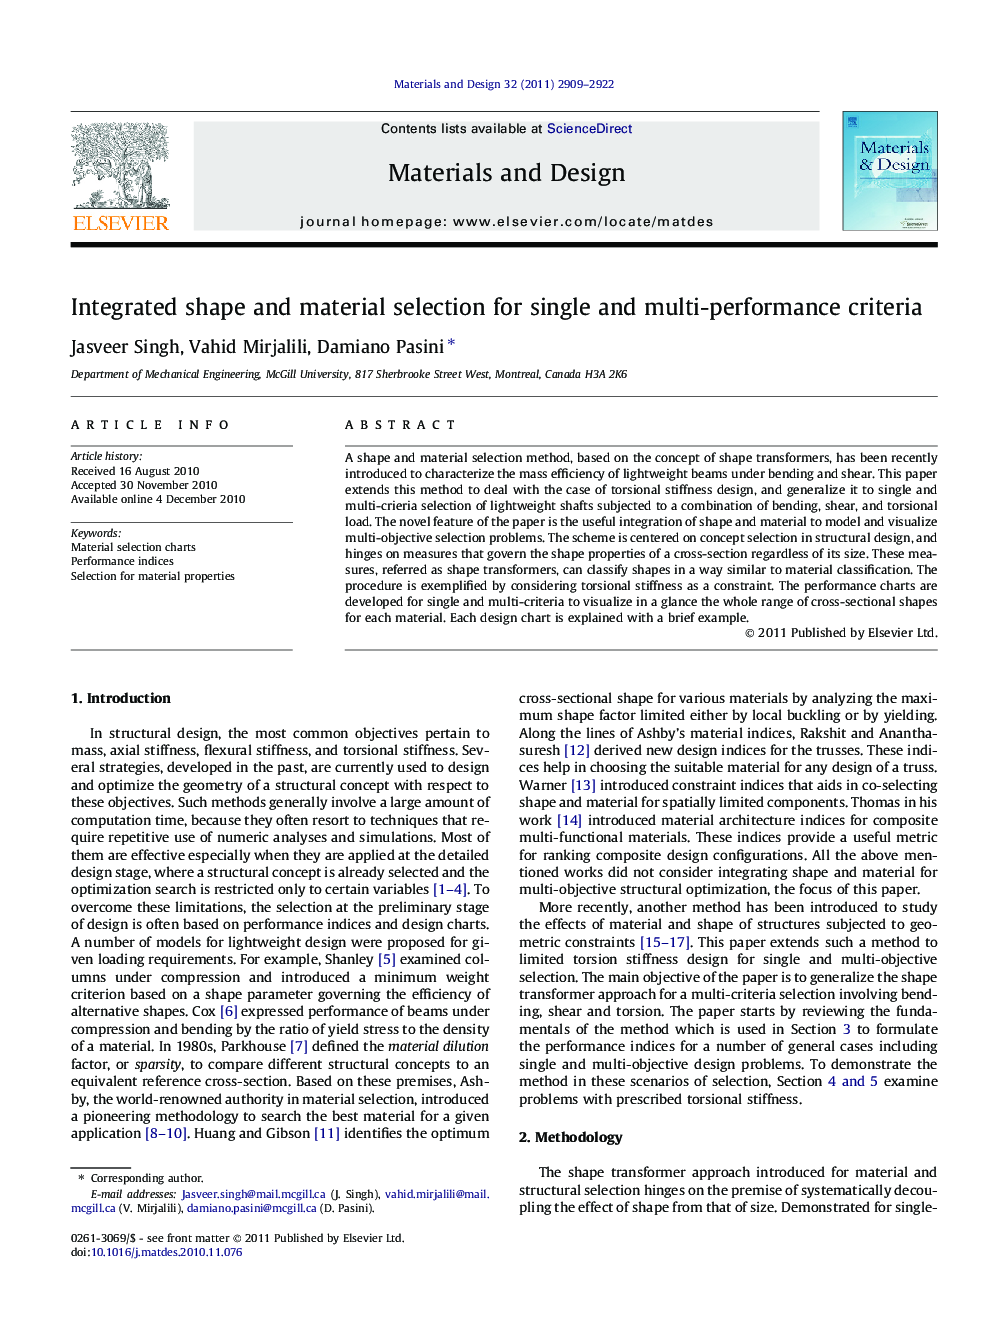 Integrated shape and material selection for single and multi-performance criteria